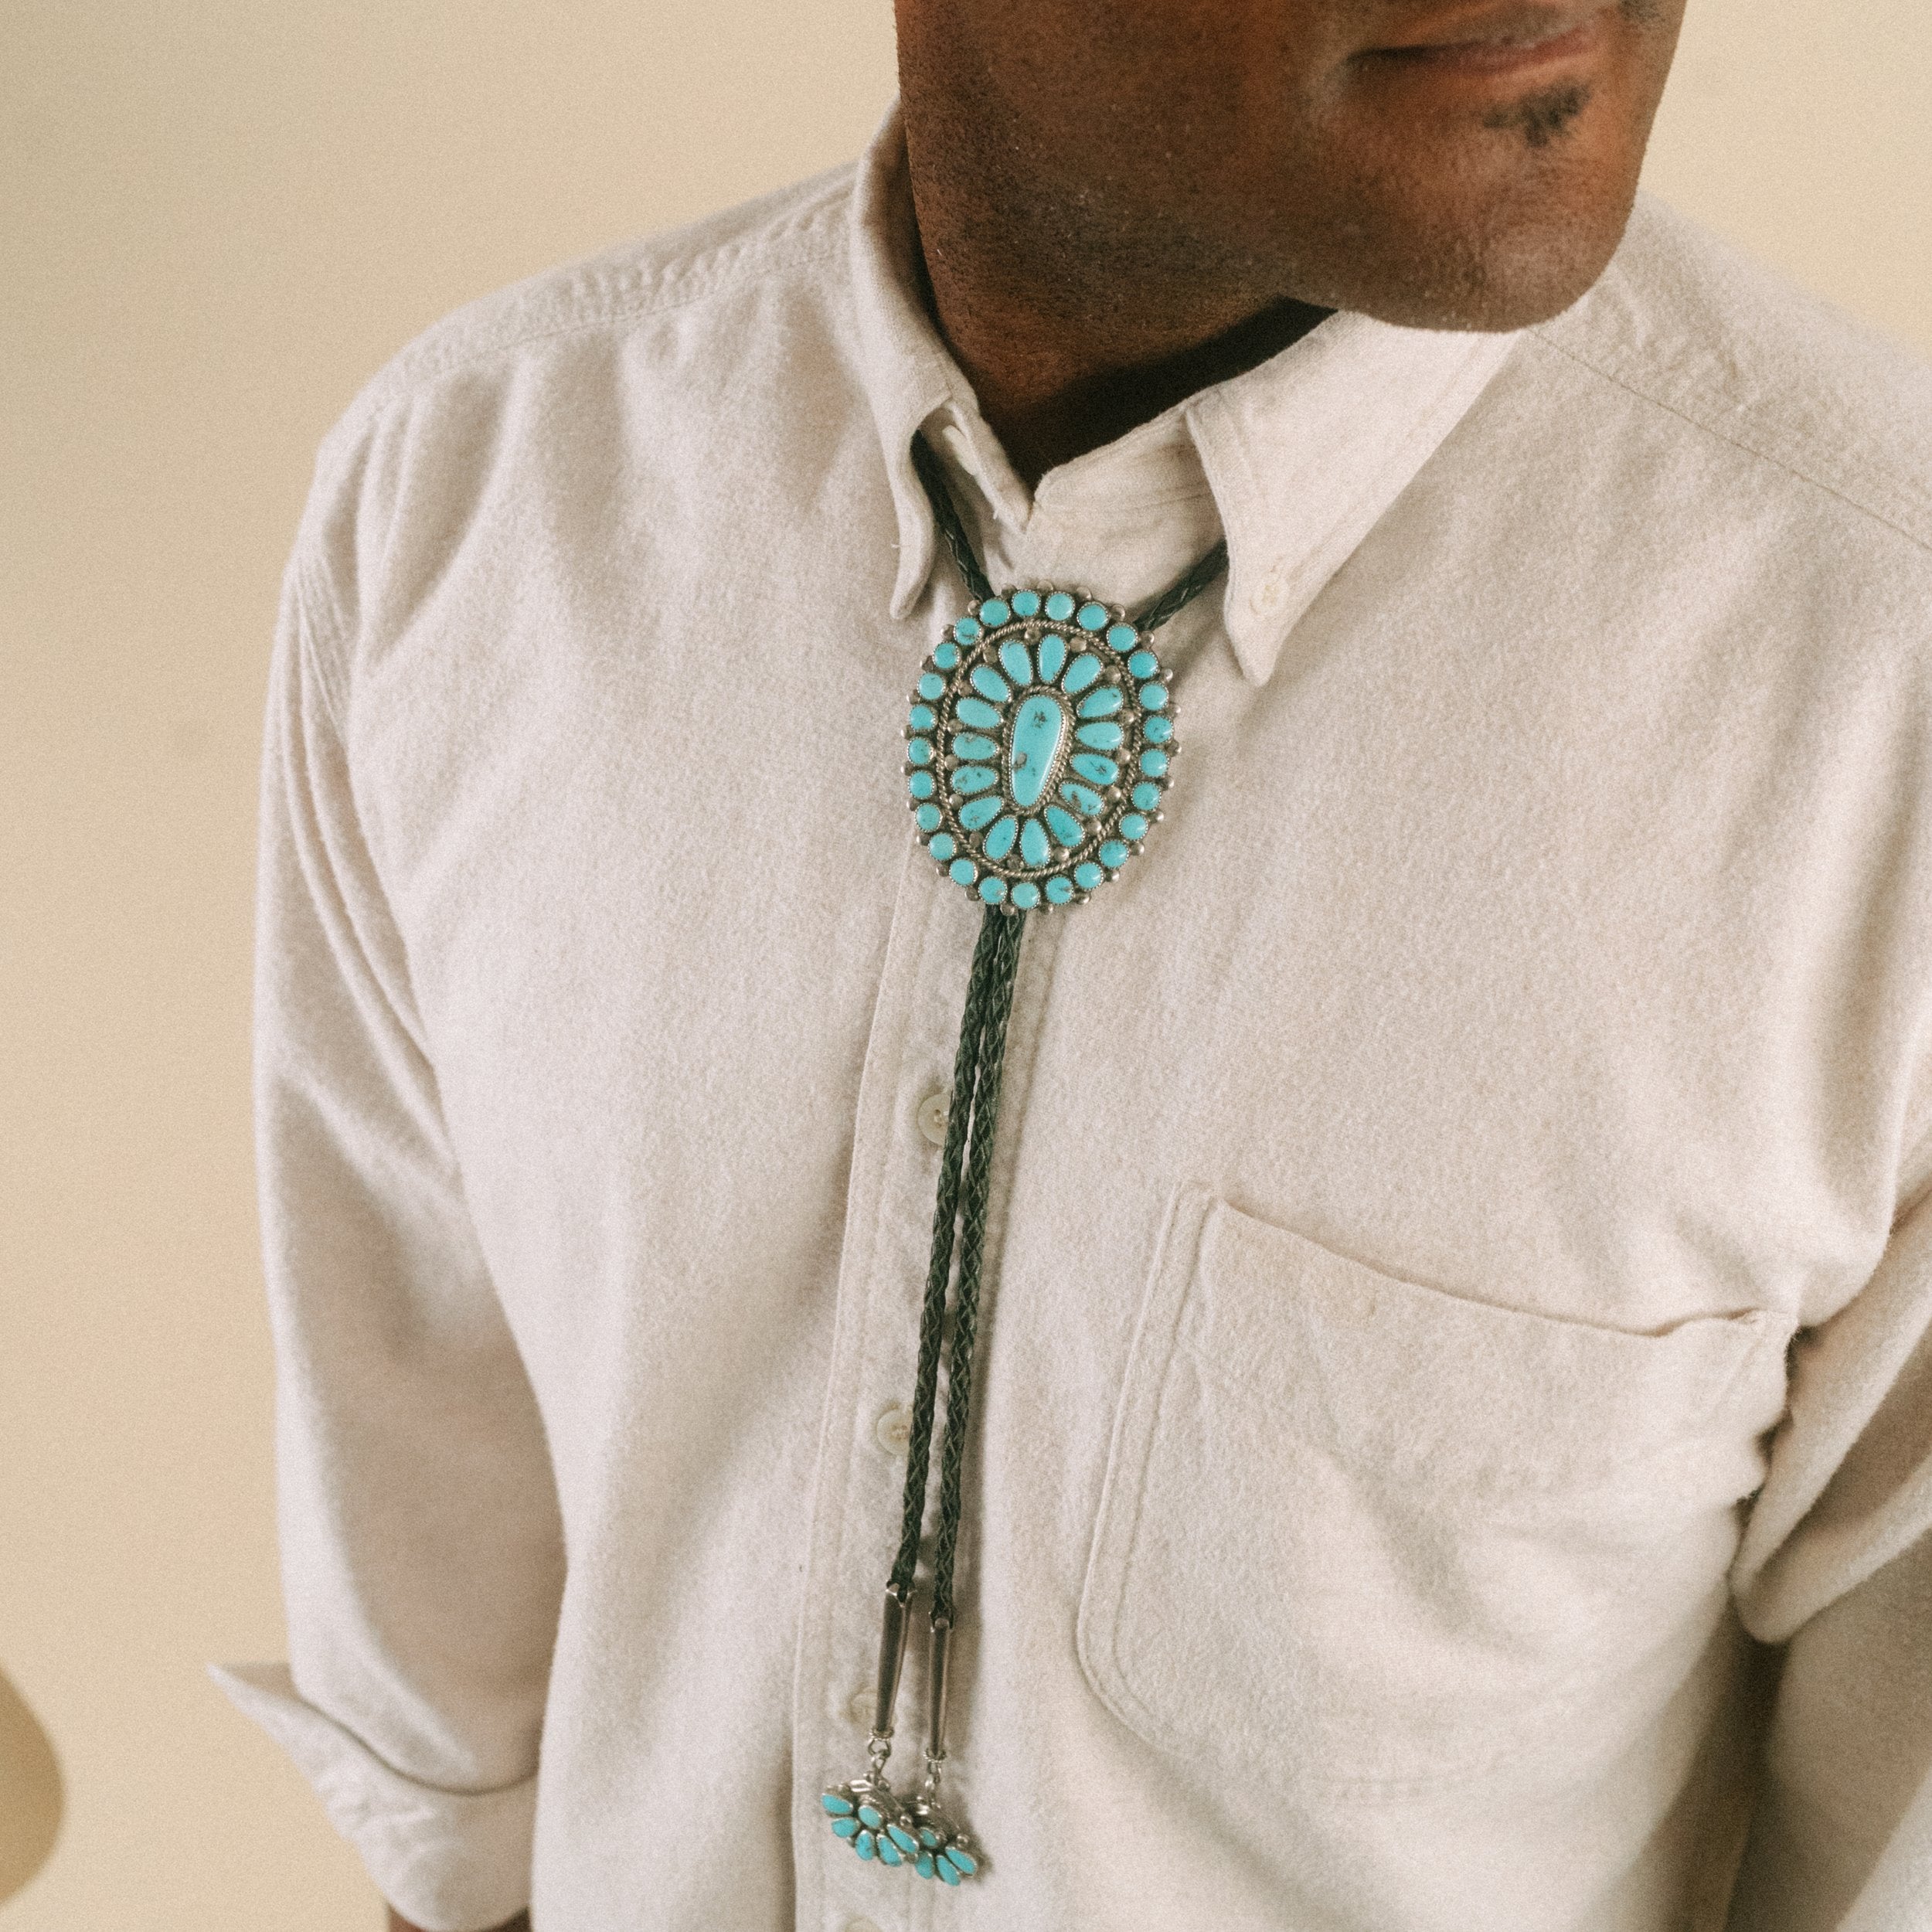 The In Bloom Petit Point Bolo Tie, c. 1960's